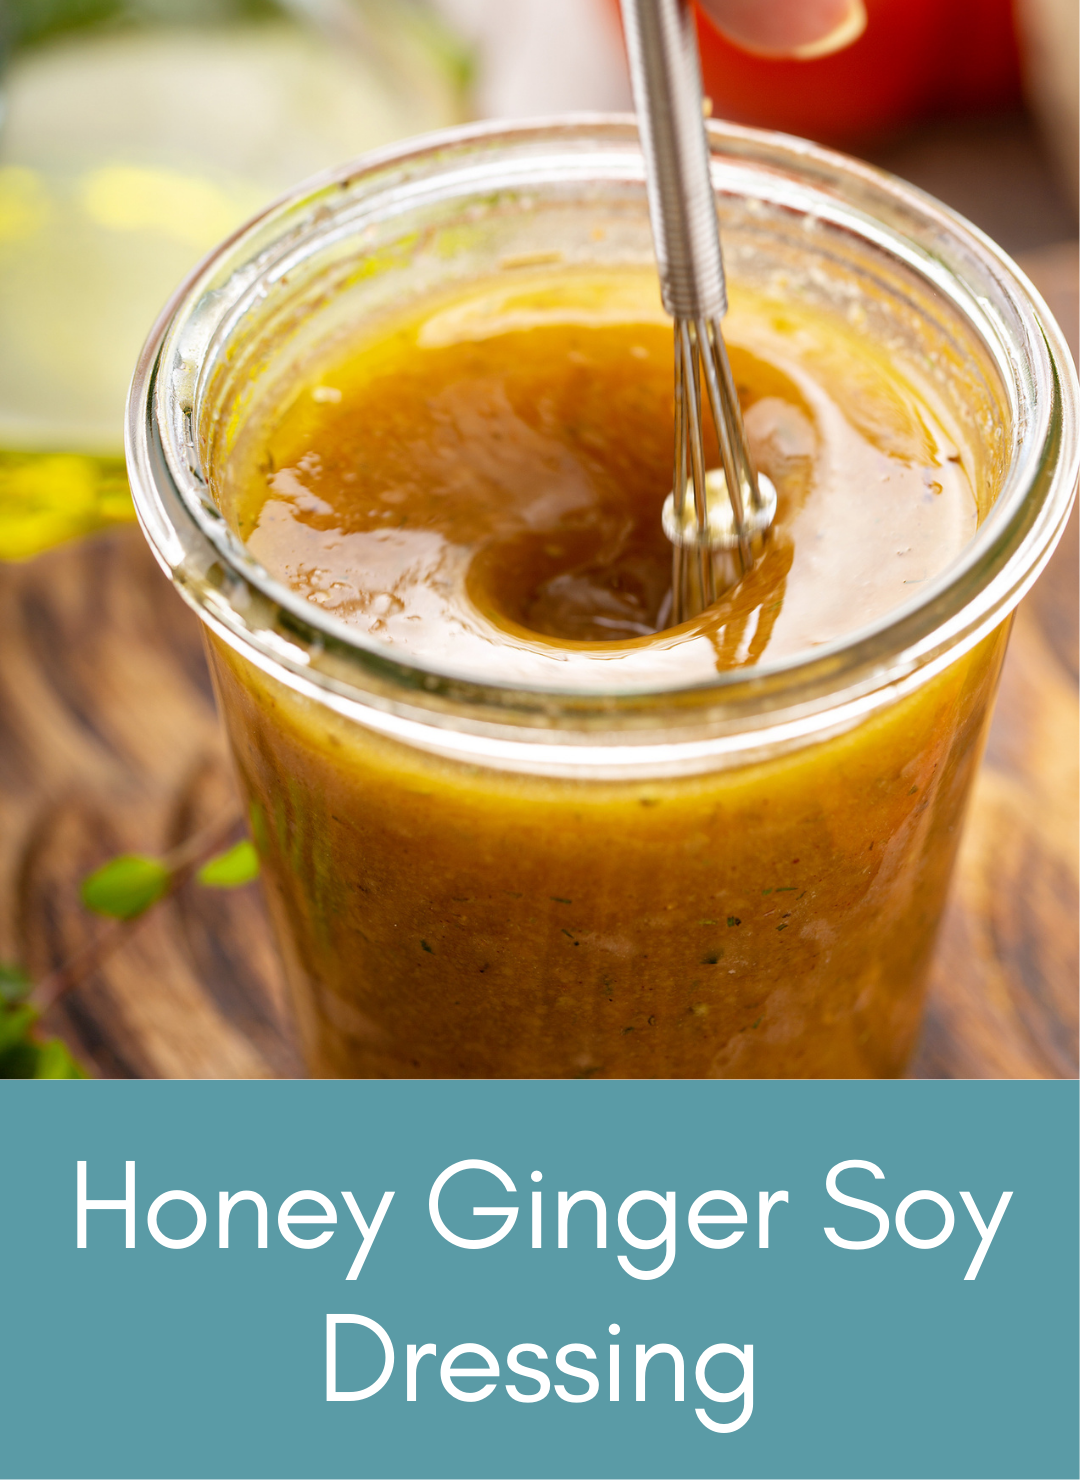 Honey ginger soy dressing Picture with link to recipe